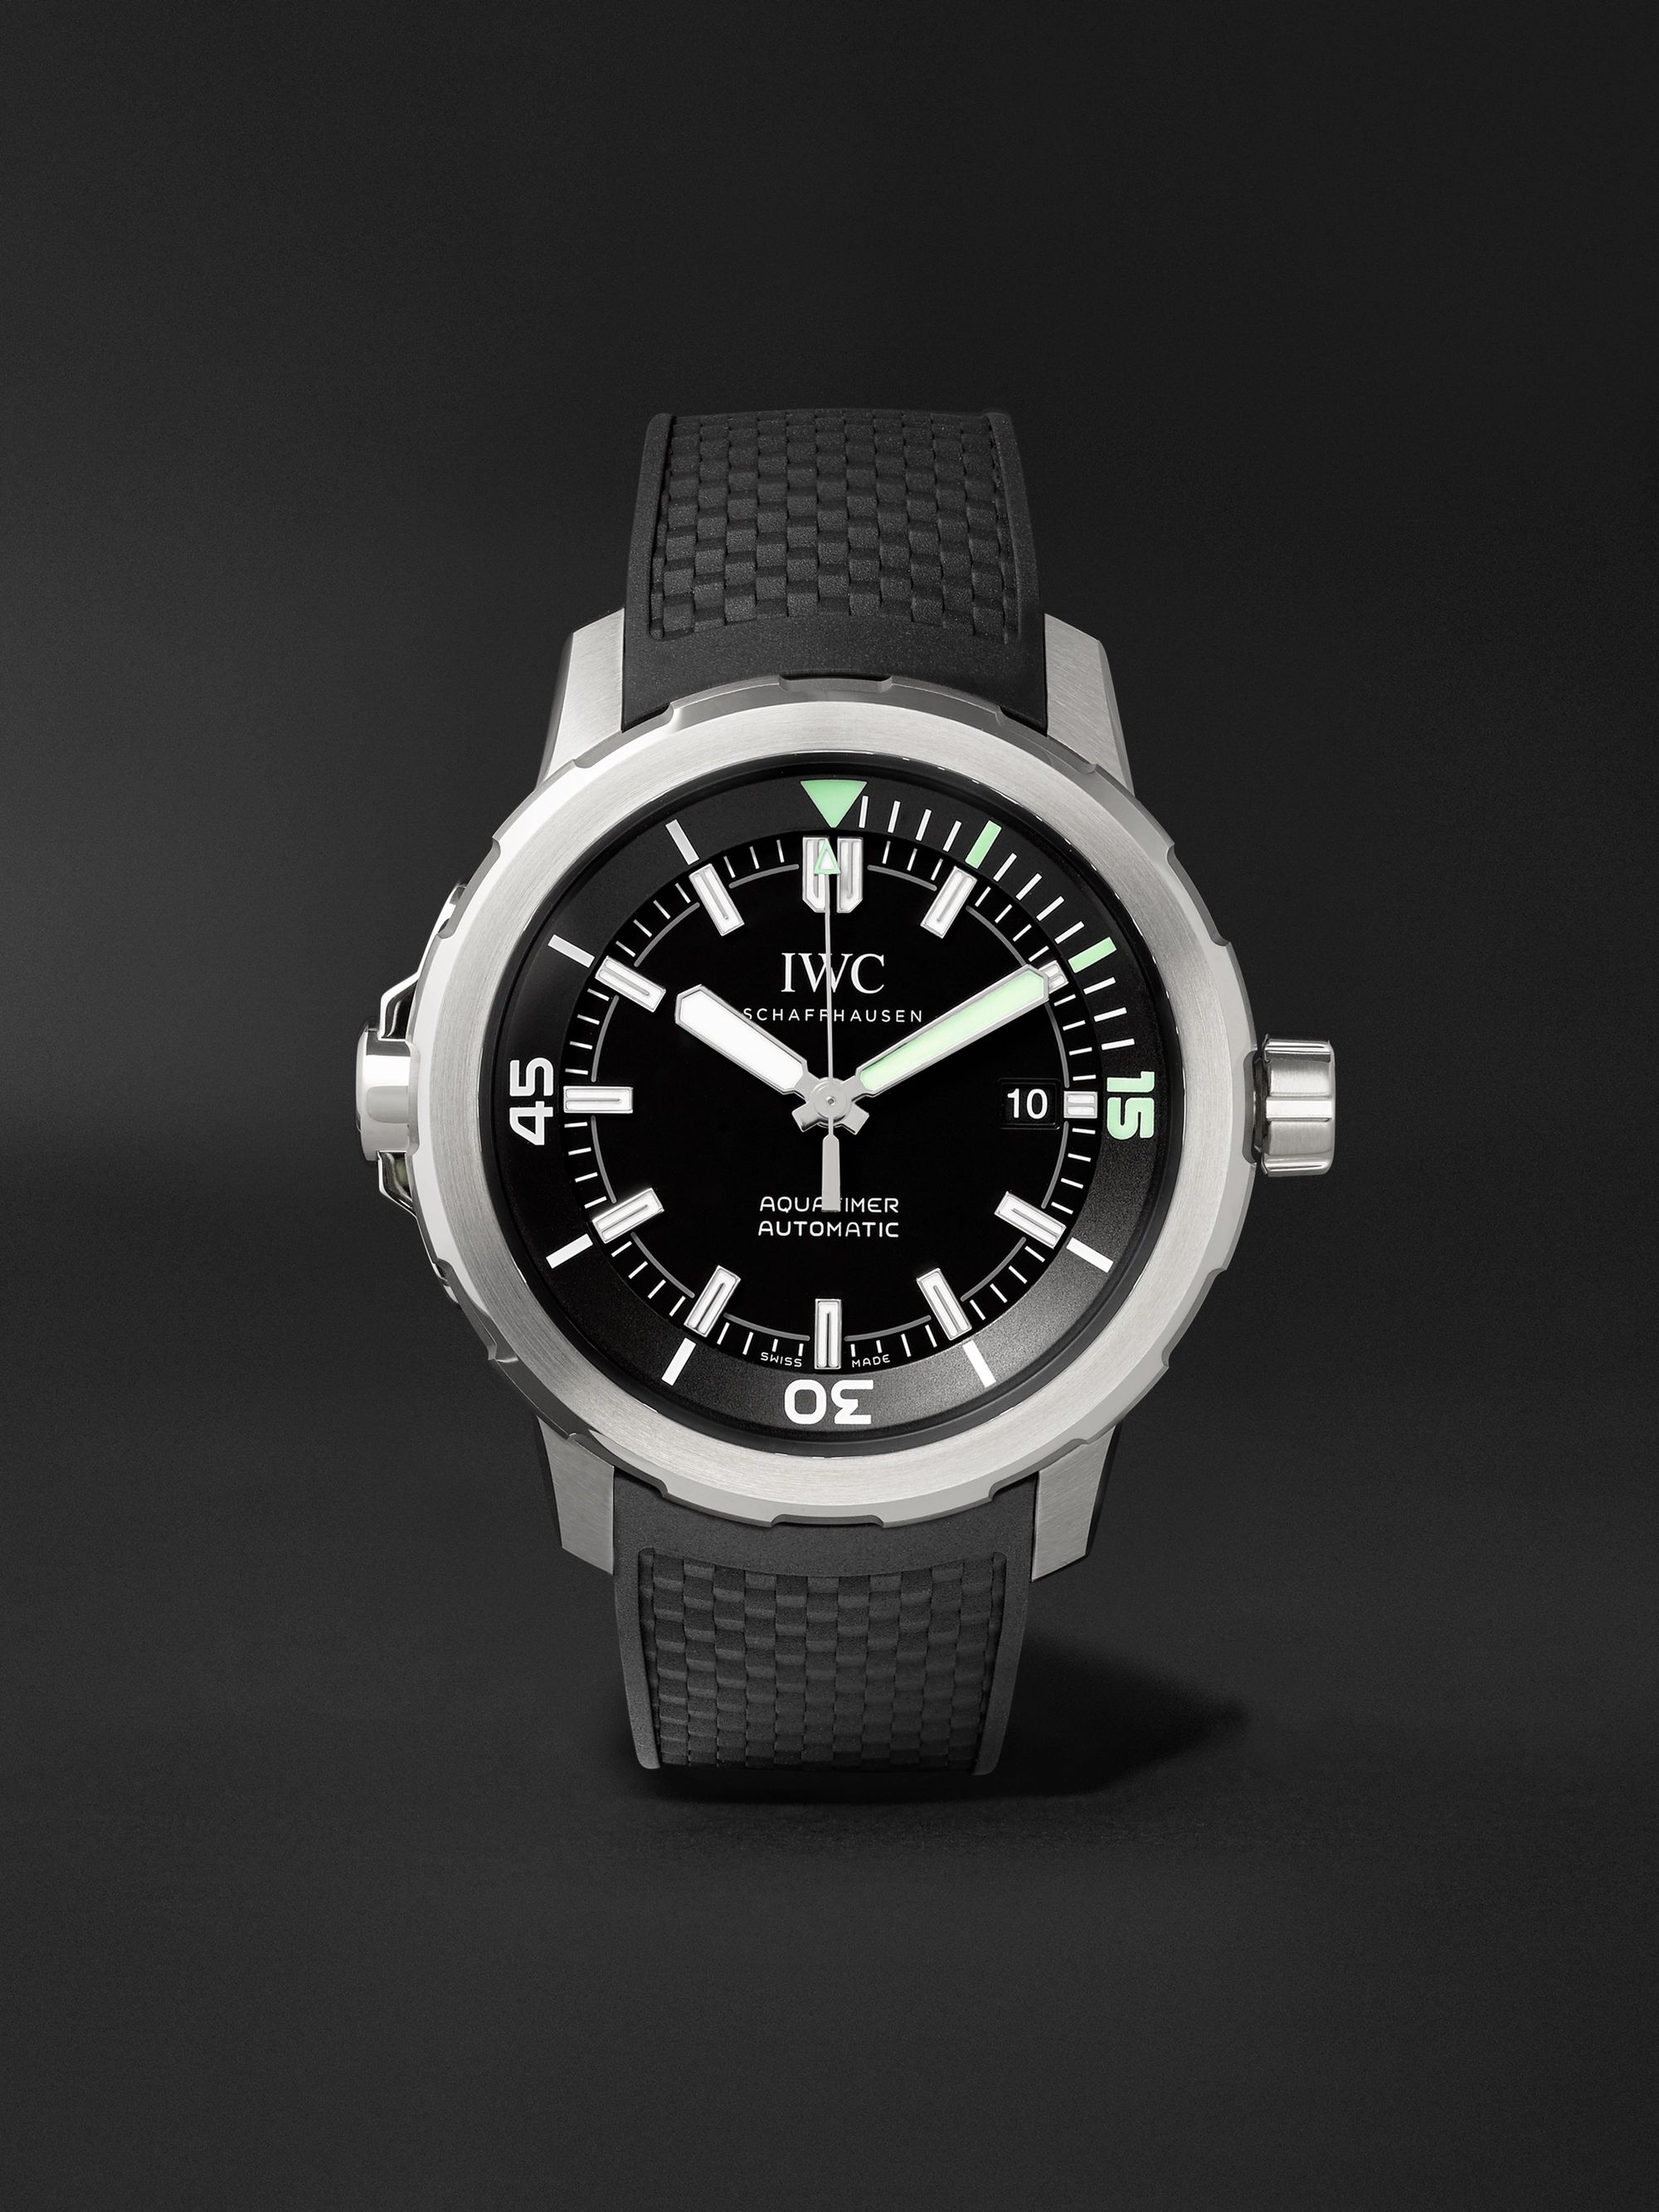 IWC SCHAFFHAUSEN Aquatimer Automatic 42mm Stainless Steel and Rubber Watch, Ref. No. IW329001